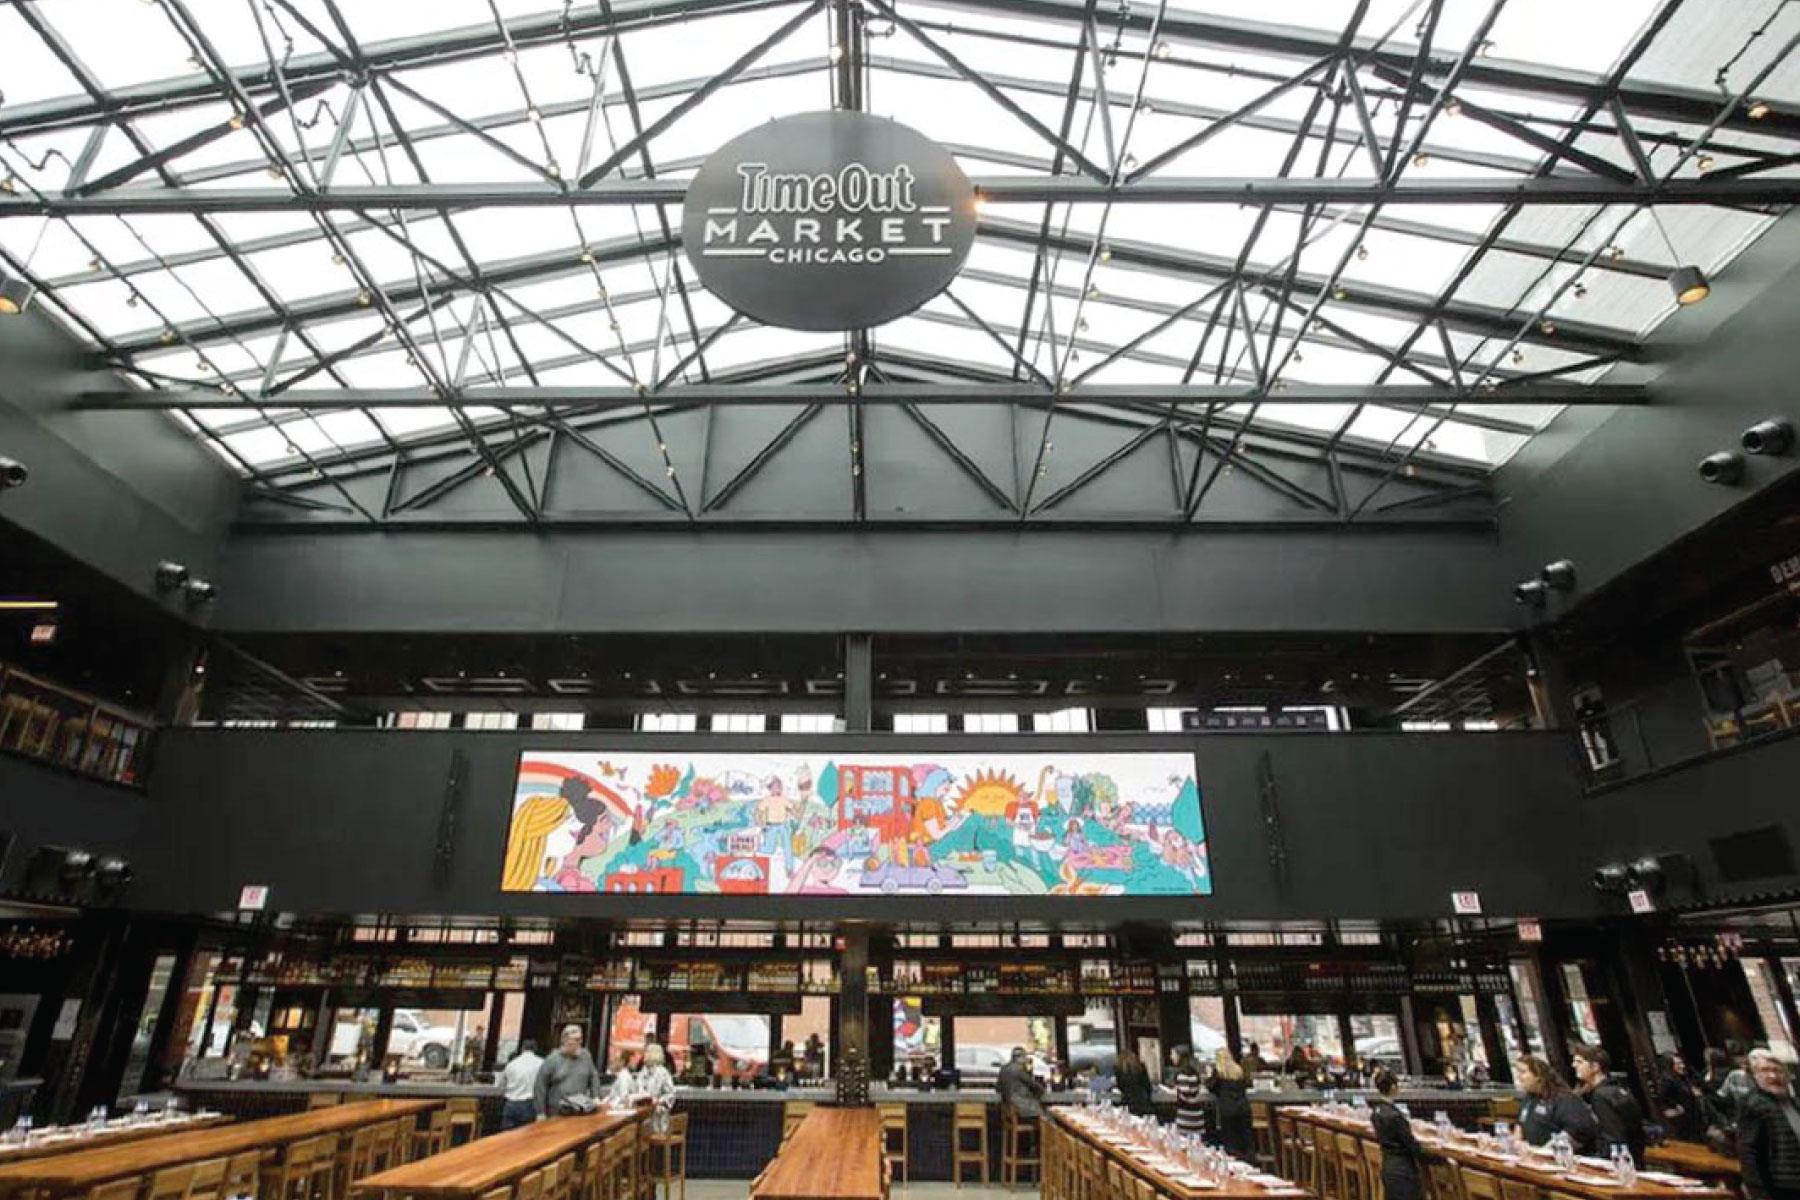 The interior of food hall TimeOut Market Chicago